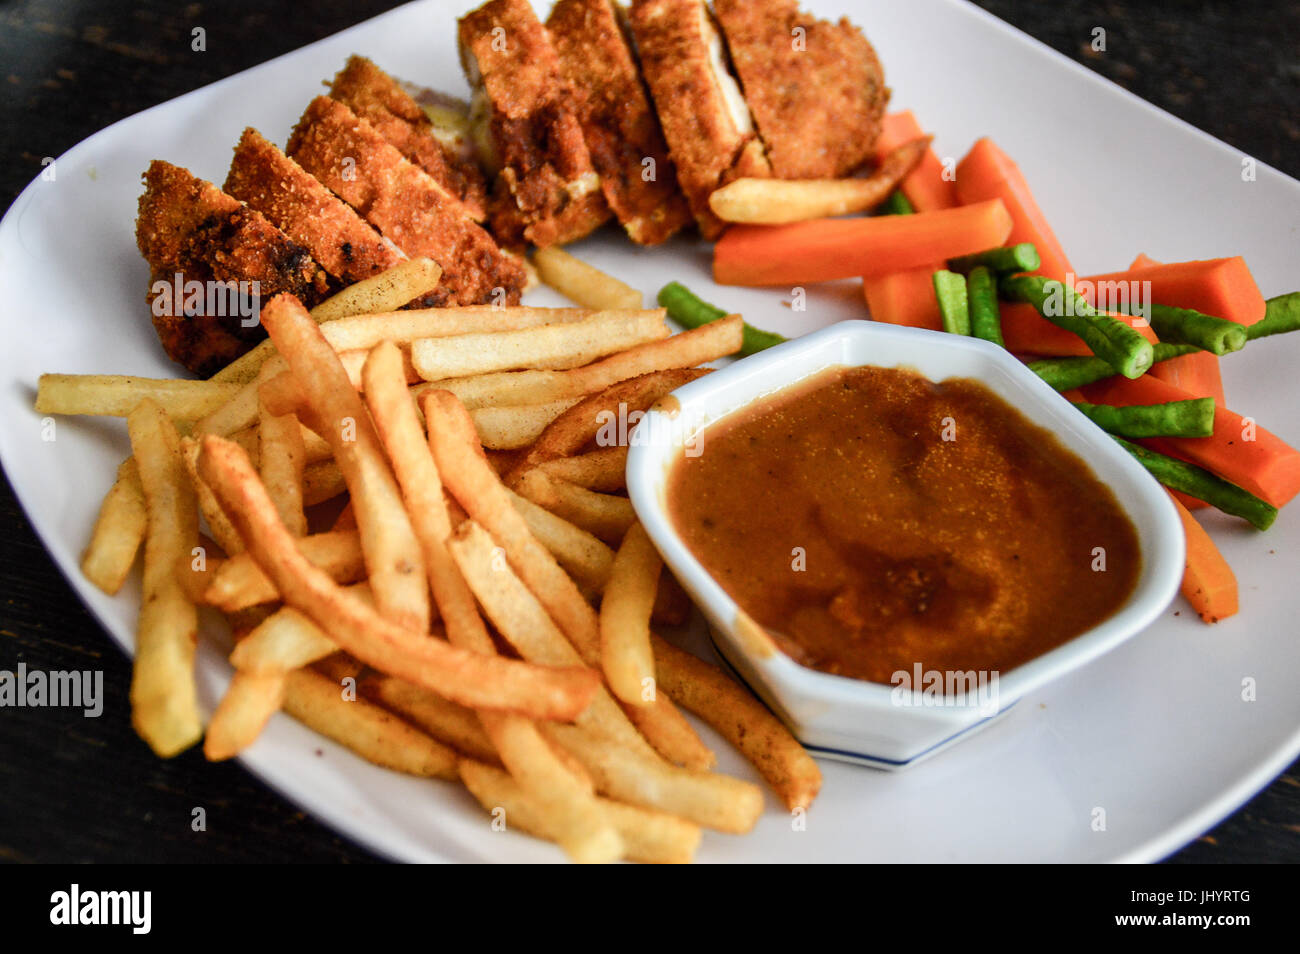 home cooked meal of chicken cordon bleu and french fries Stock Photo